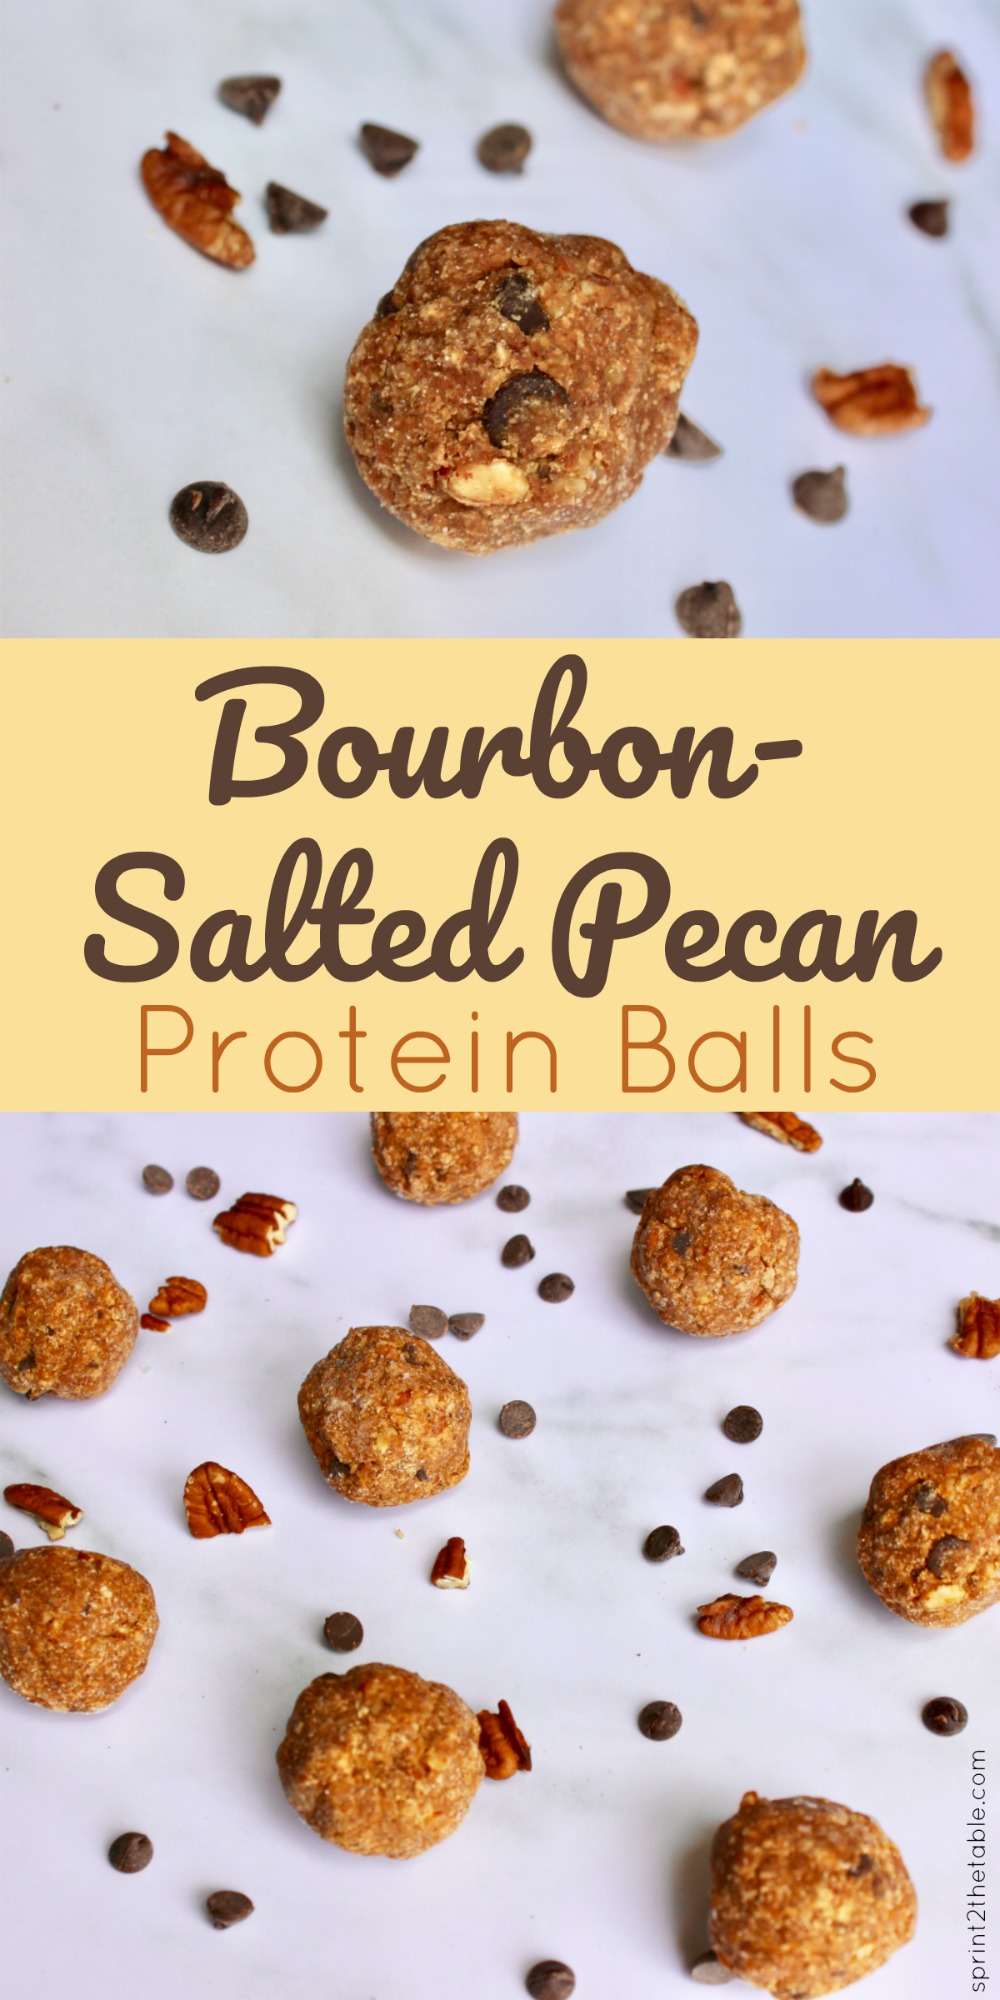 Are you a fan of pie?  How about pecan pie?  These Bourbon-Salted Pecan Protein Balls are a healthier version of a boozy, chocolate-laced pecan pie! 